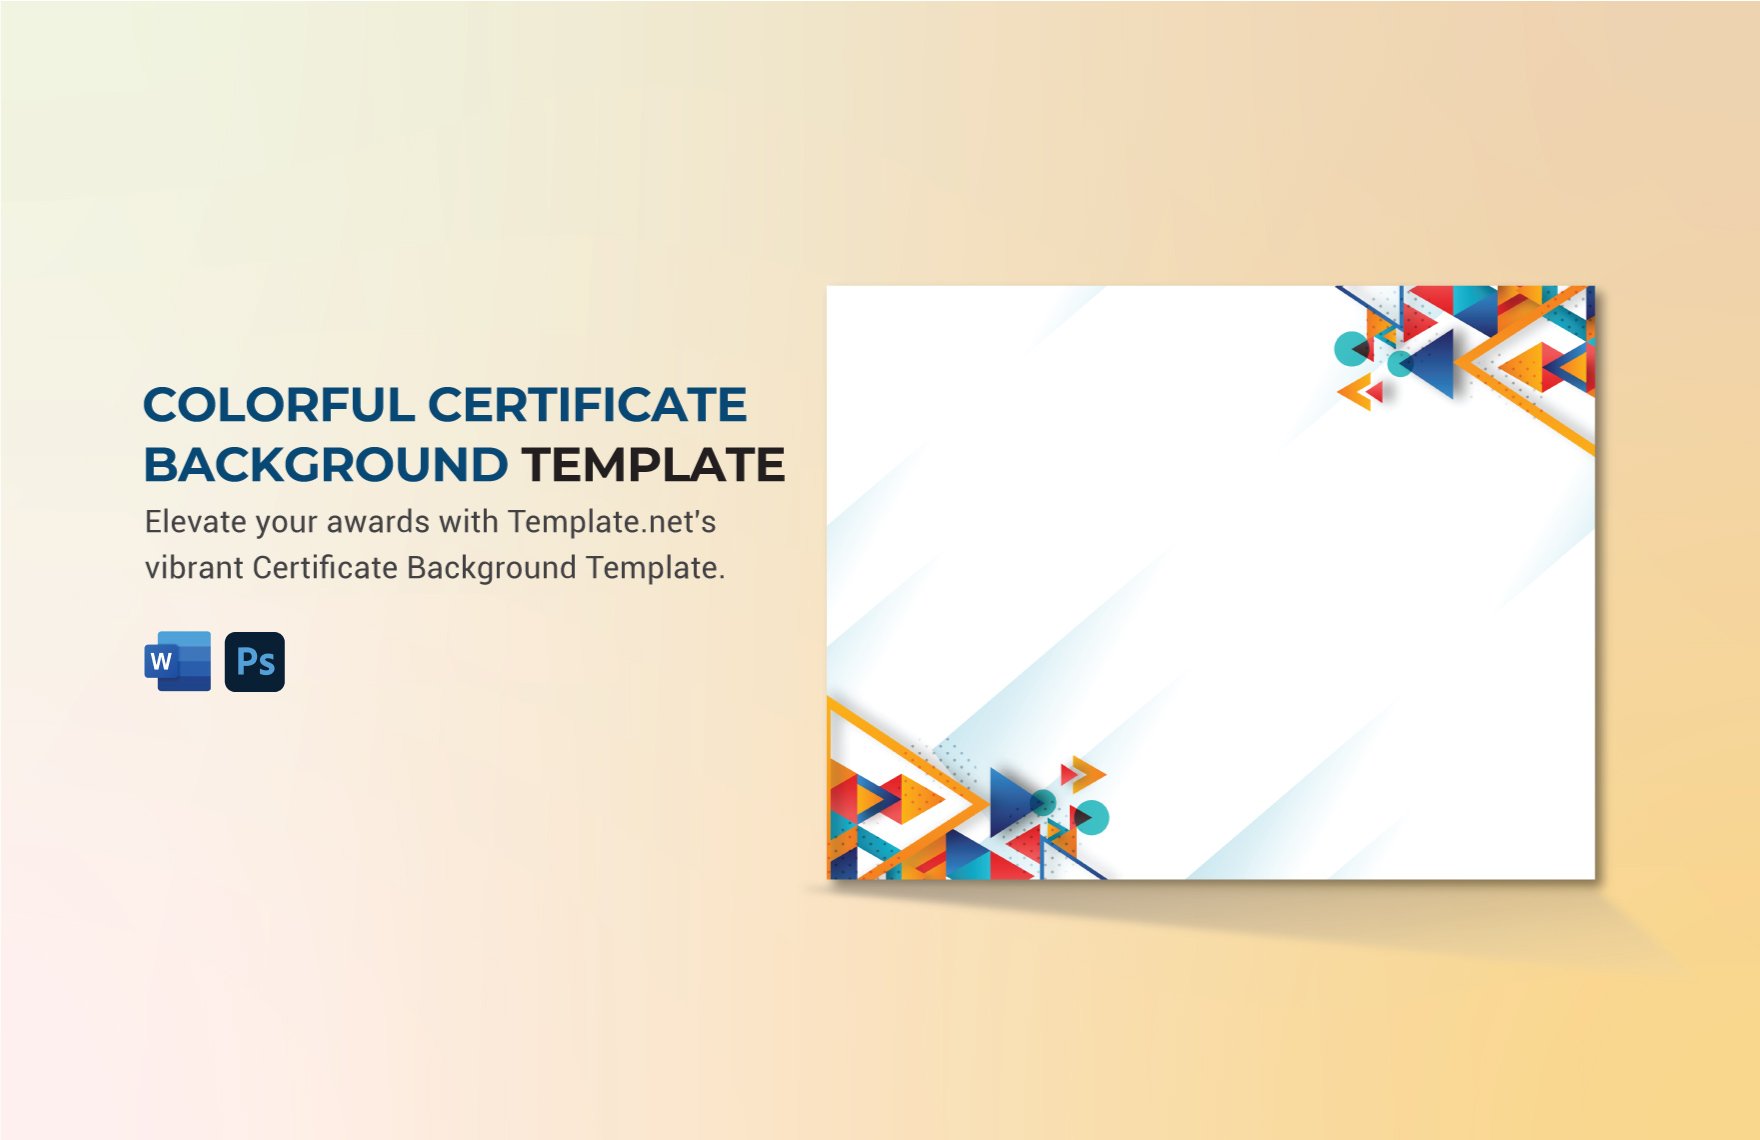 Colorful Certificate Background Template